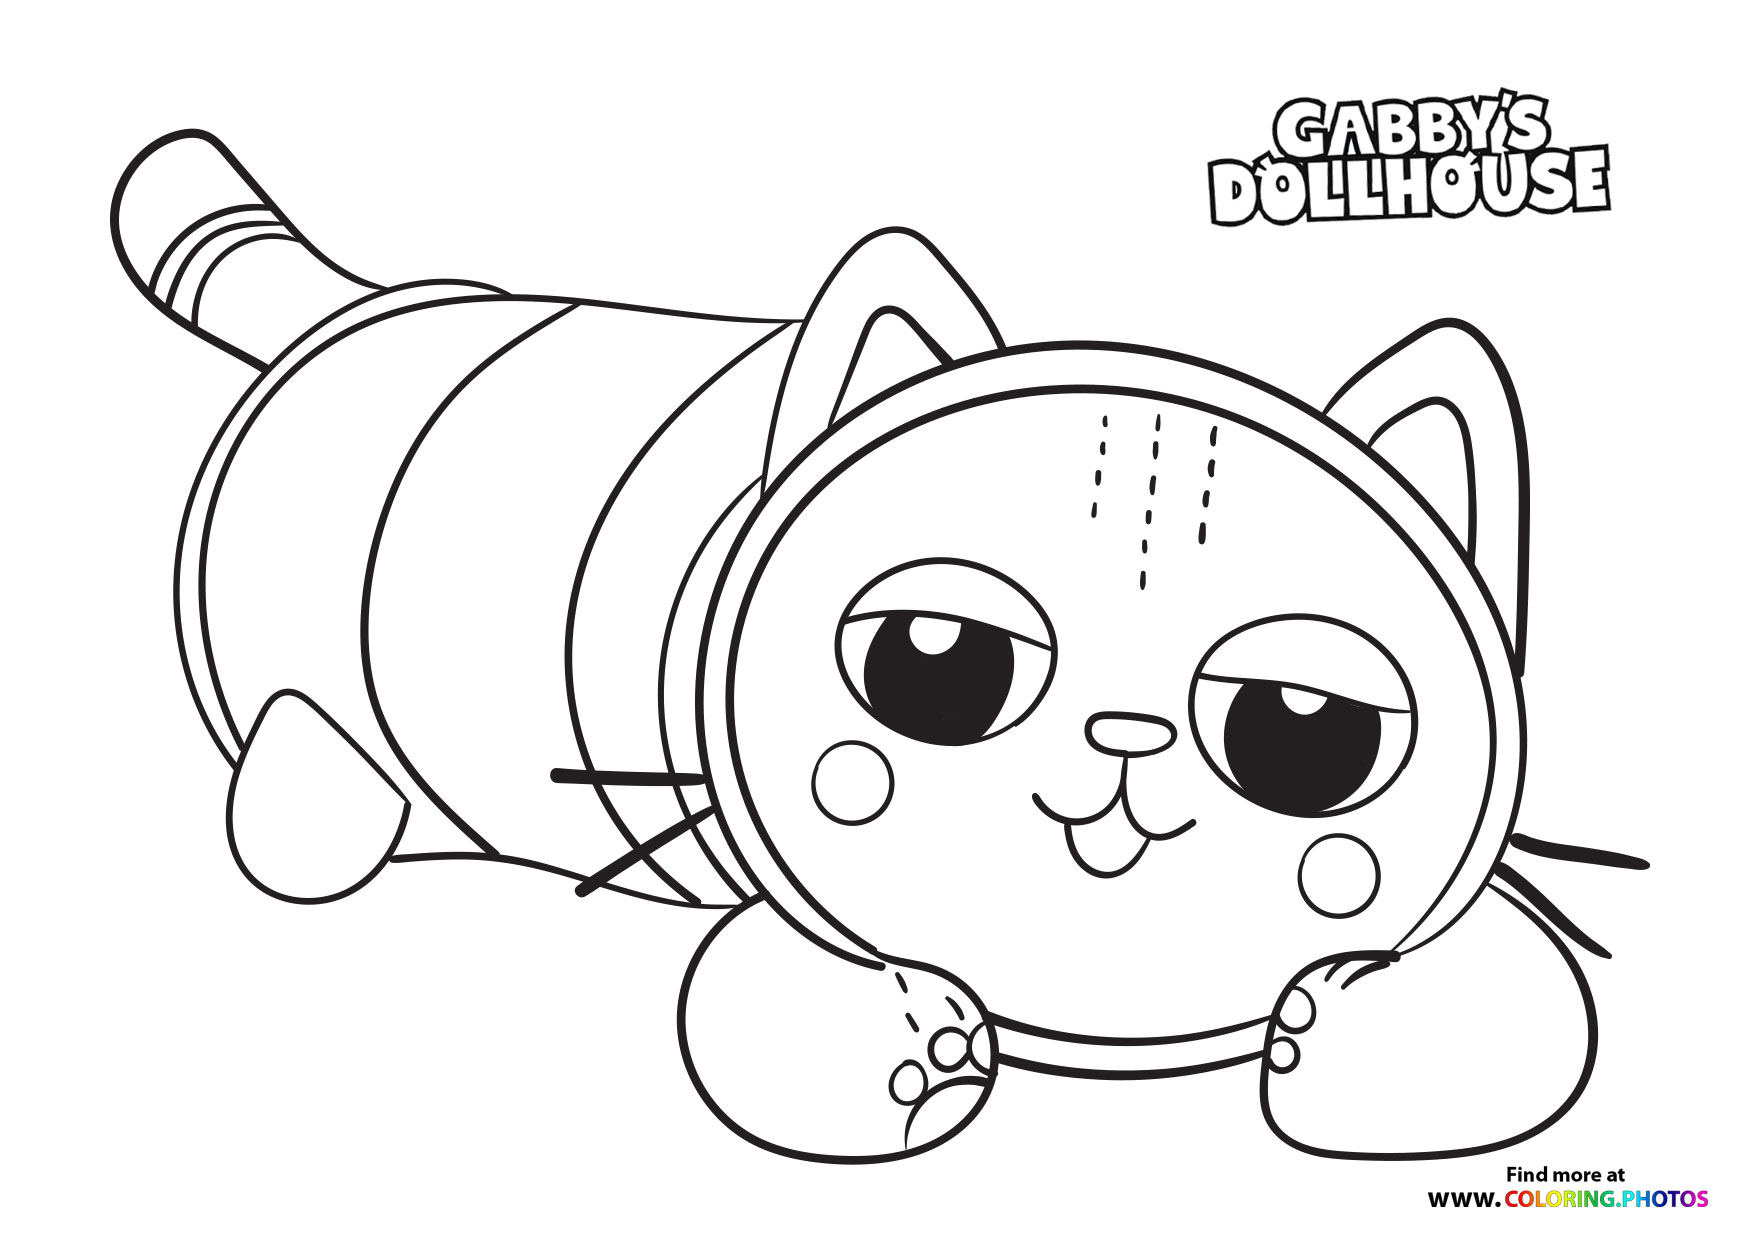 Gabby s Dollhouse Printable Coloring Pages